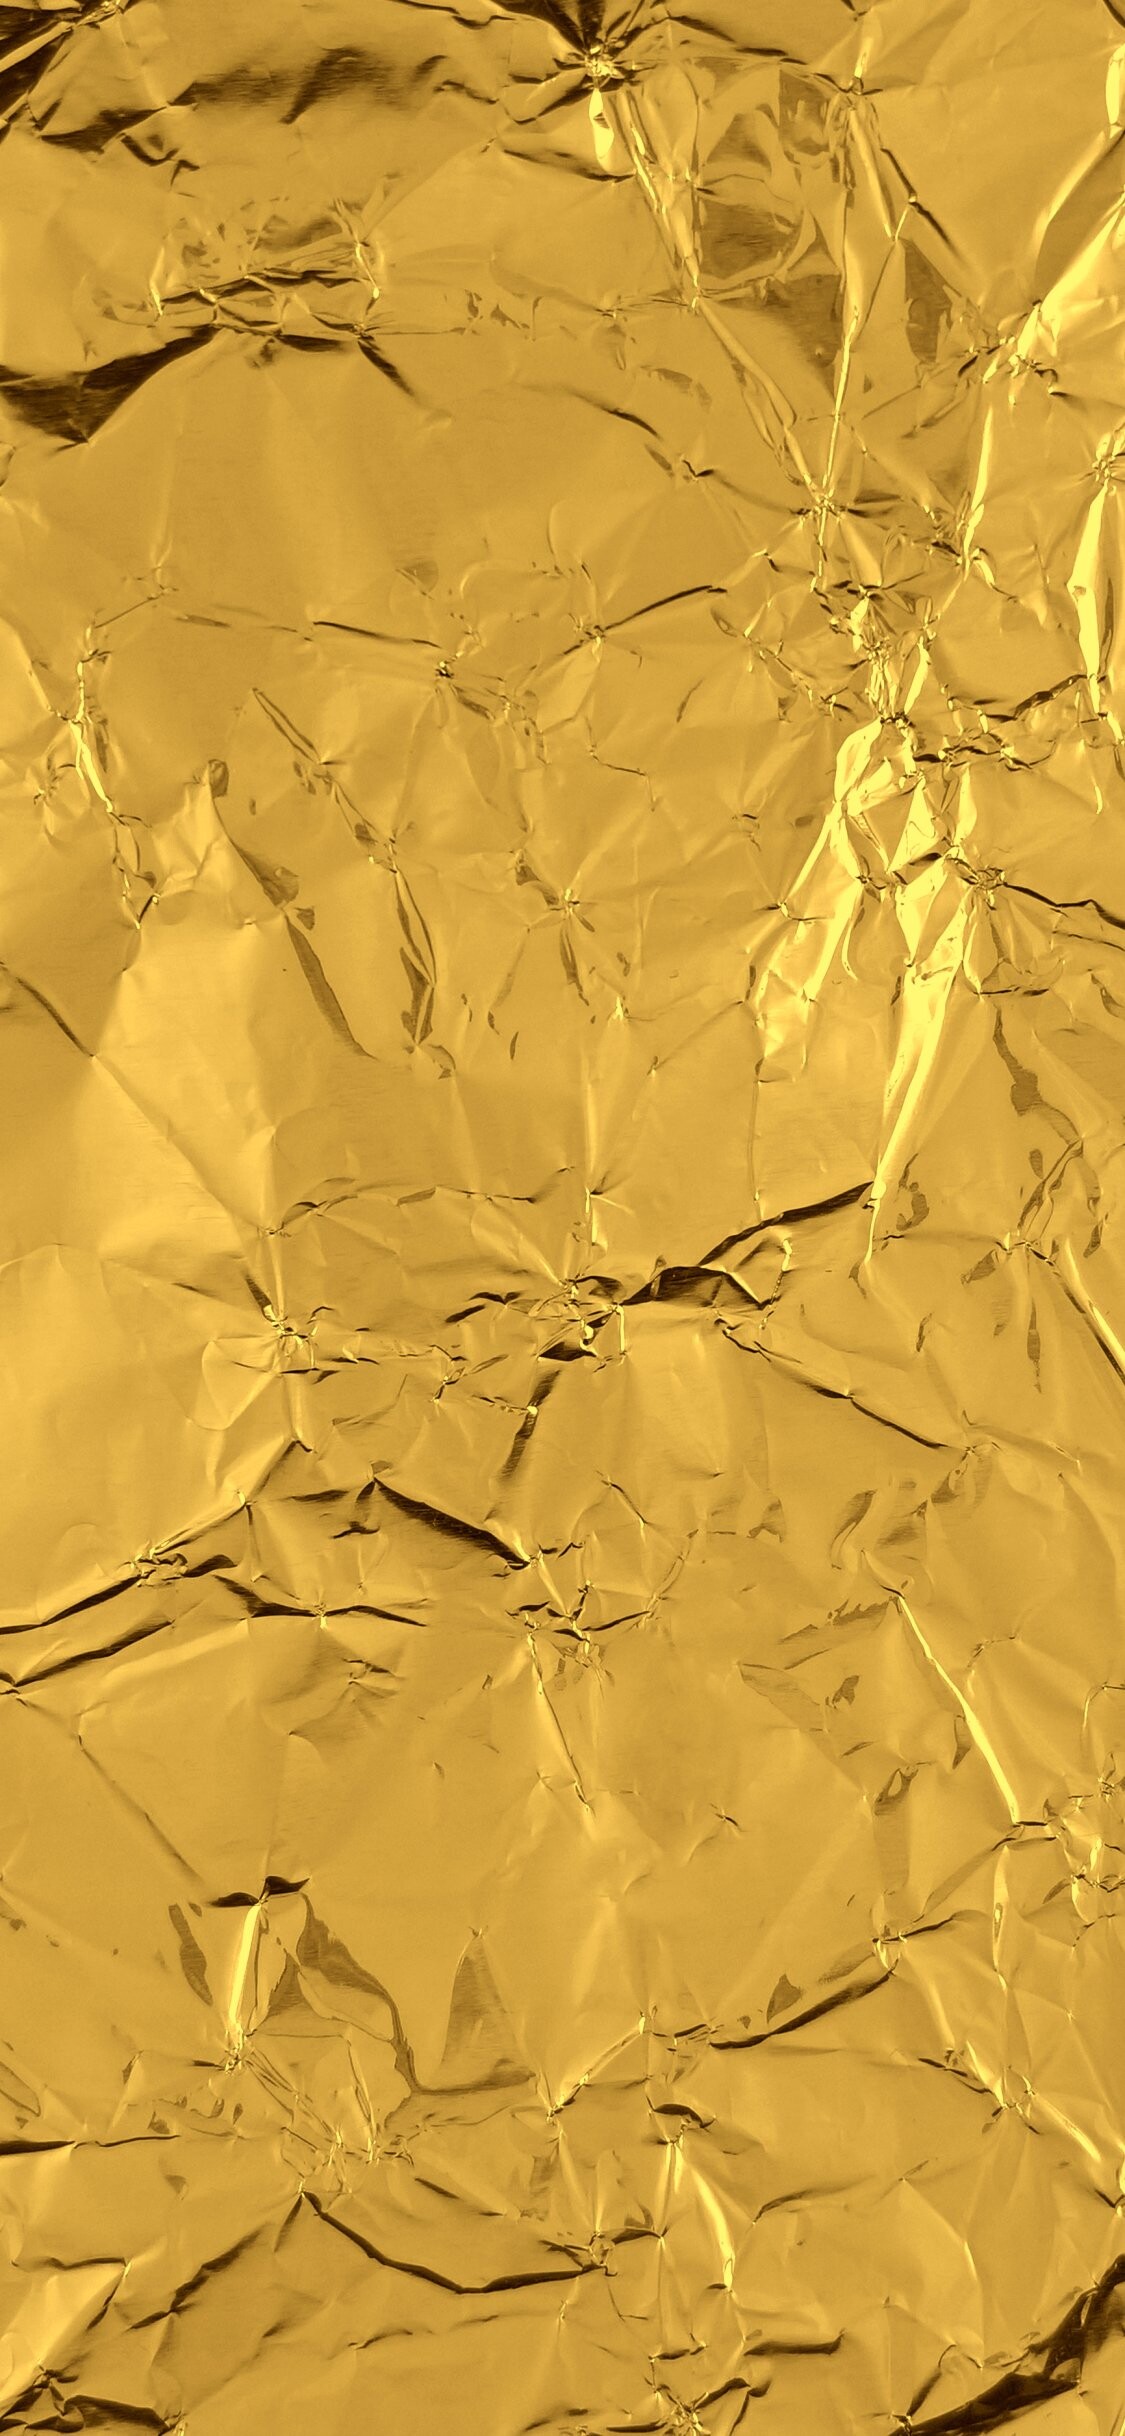 Gold Foil: Cramped Texture, Golden tinsel, Abstract design. 1130x2440 HD Background.